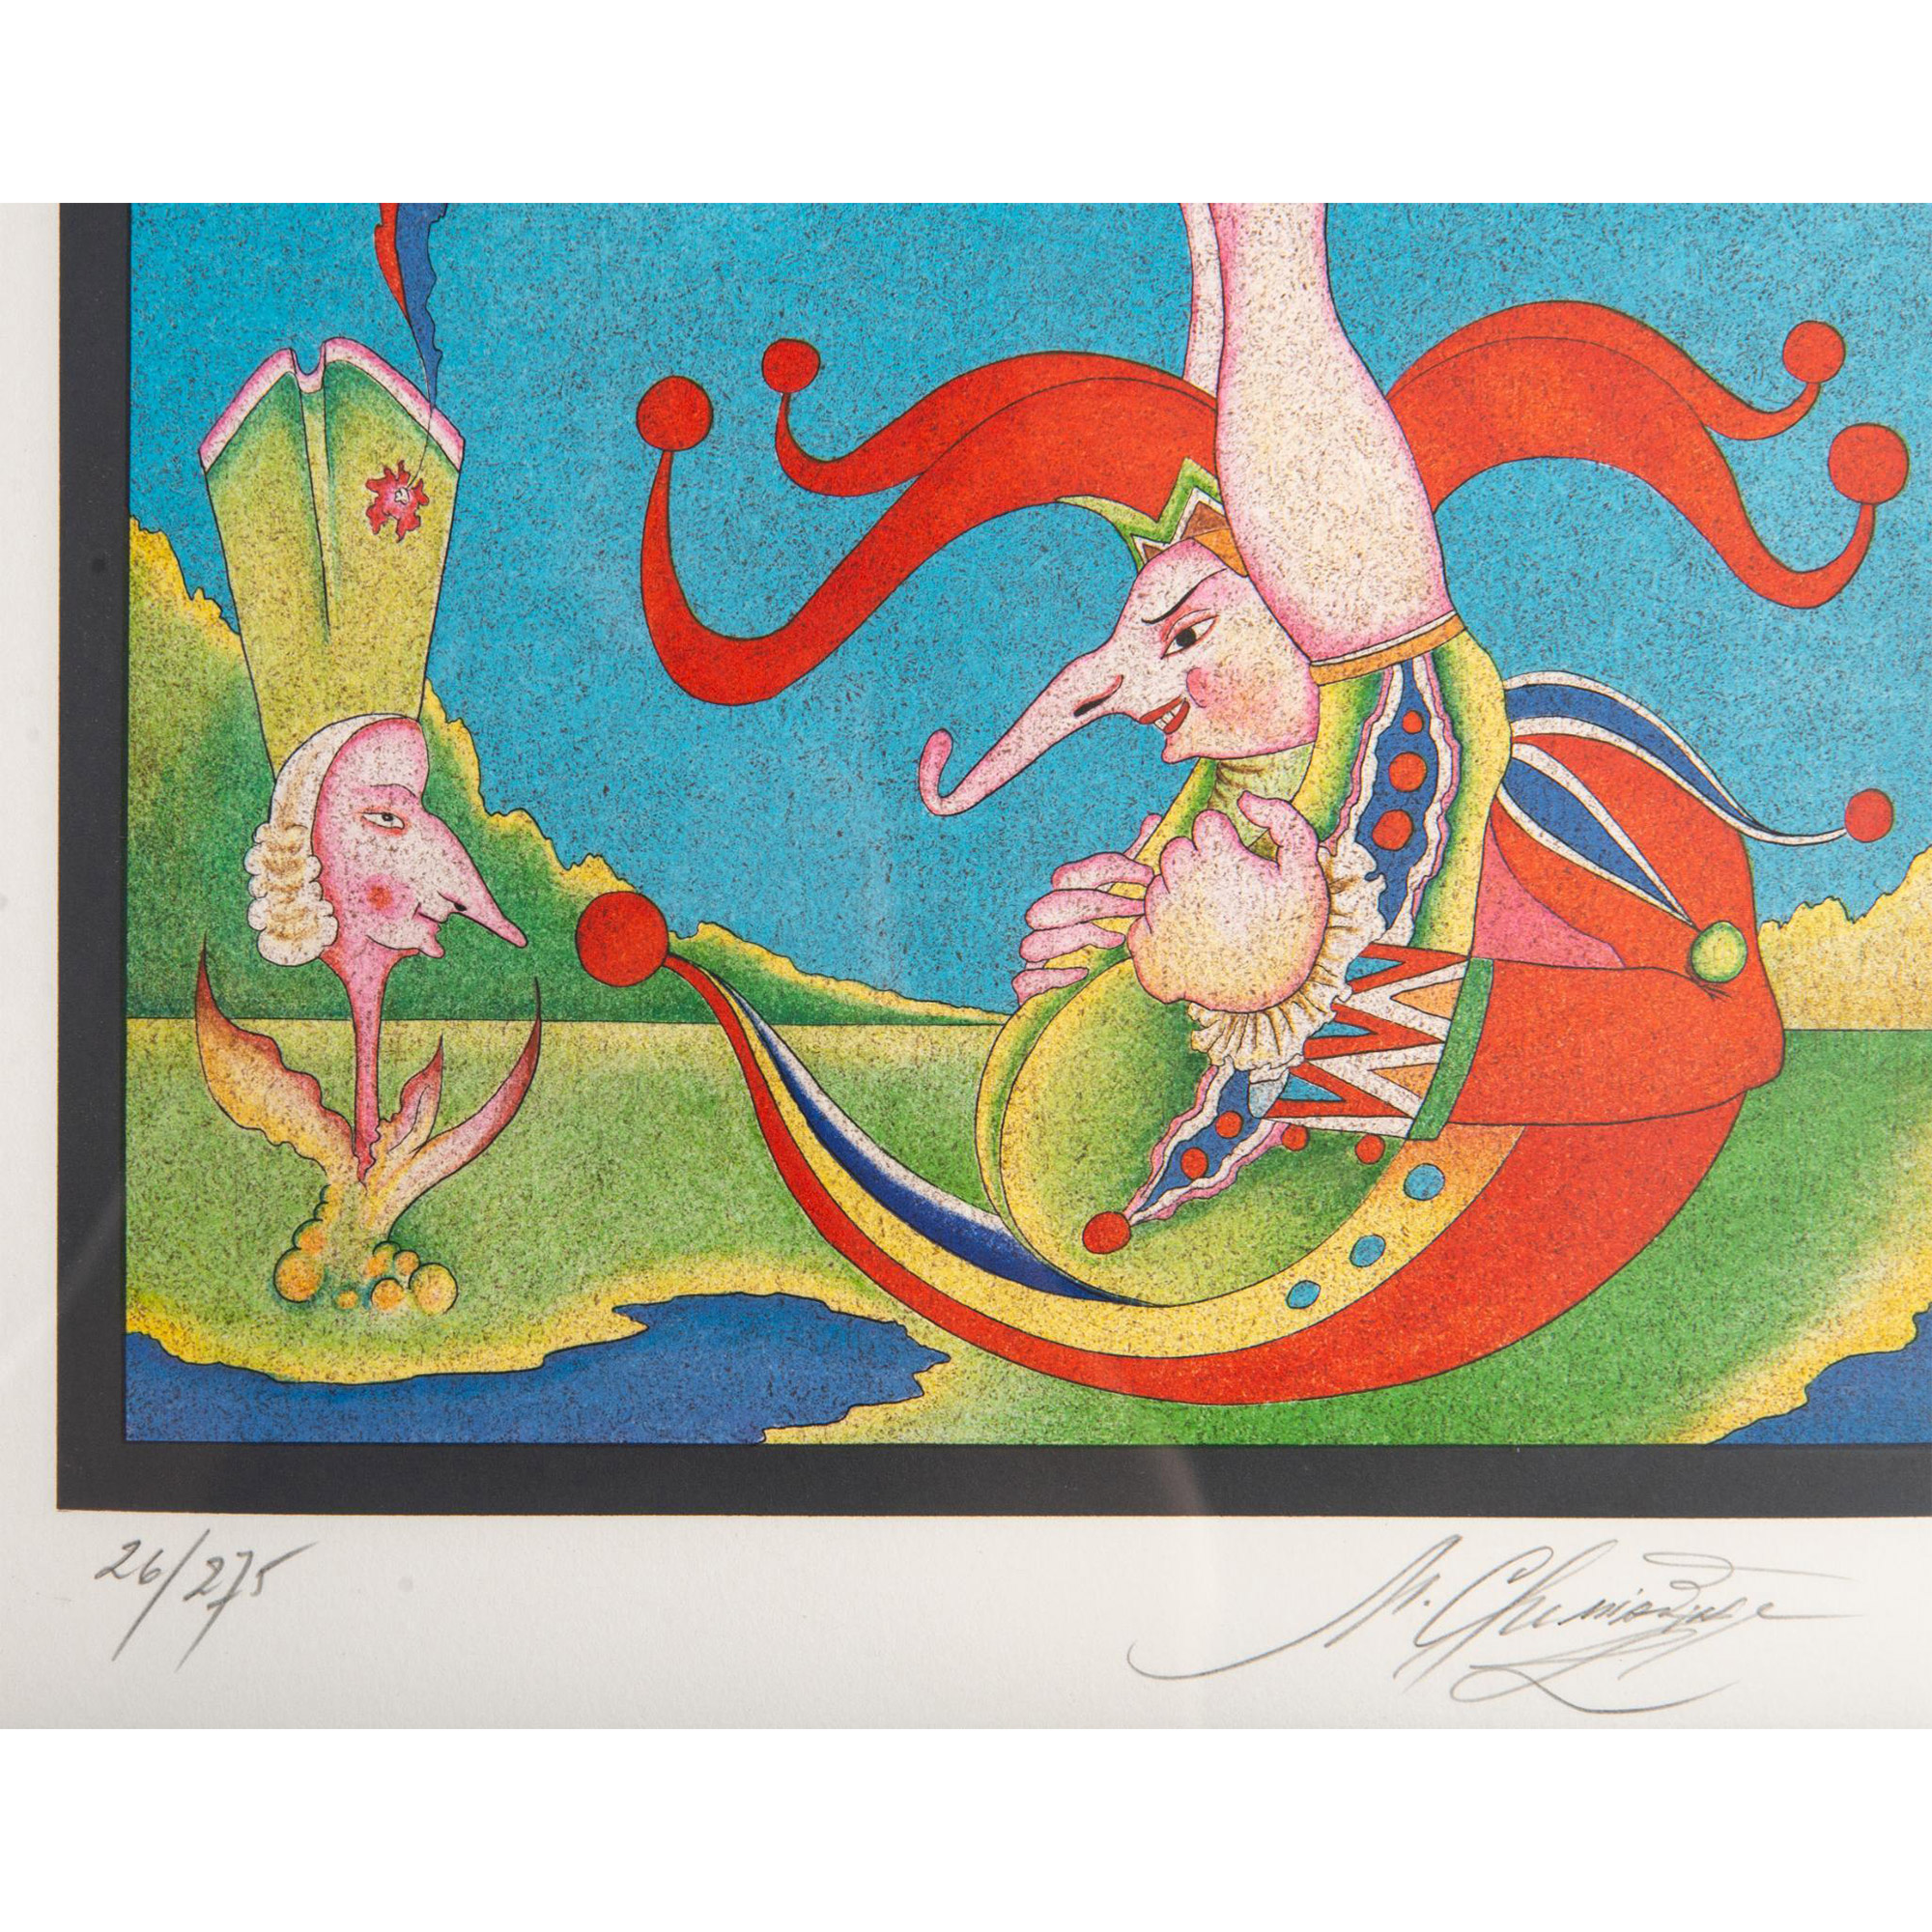 Mihail Chemiakin (Russian/French, b.1943) Color Lithograph on Velin Paper, Signed - Image 4 of 7